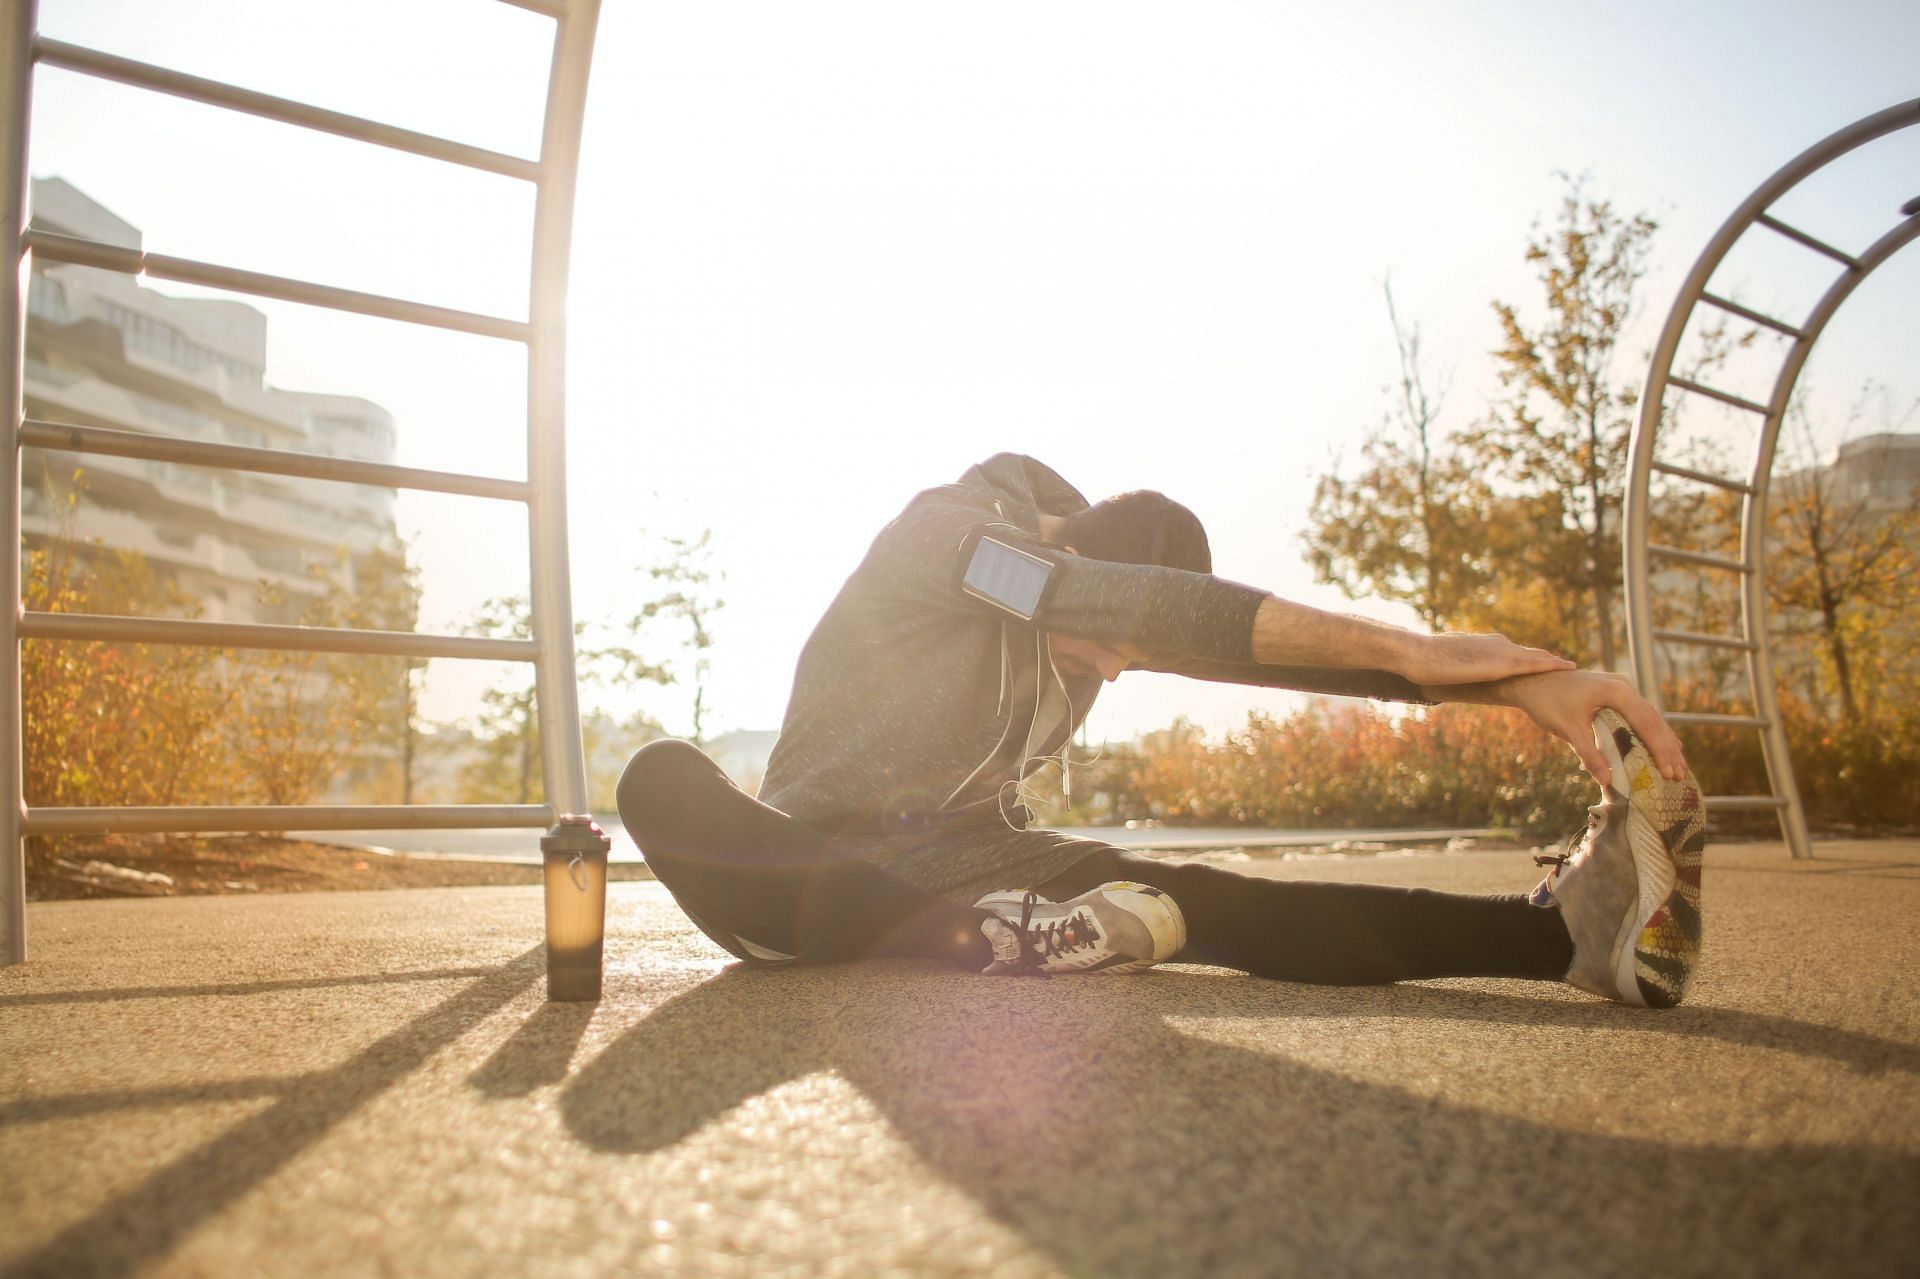 Warm ups are essential before any workout. (Image via pexels / Andrea Piacquadio)